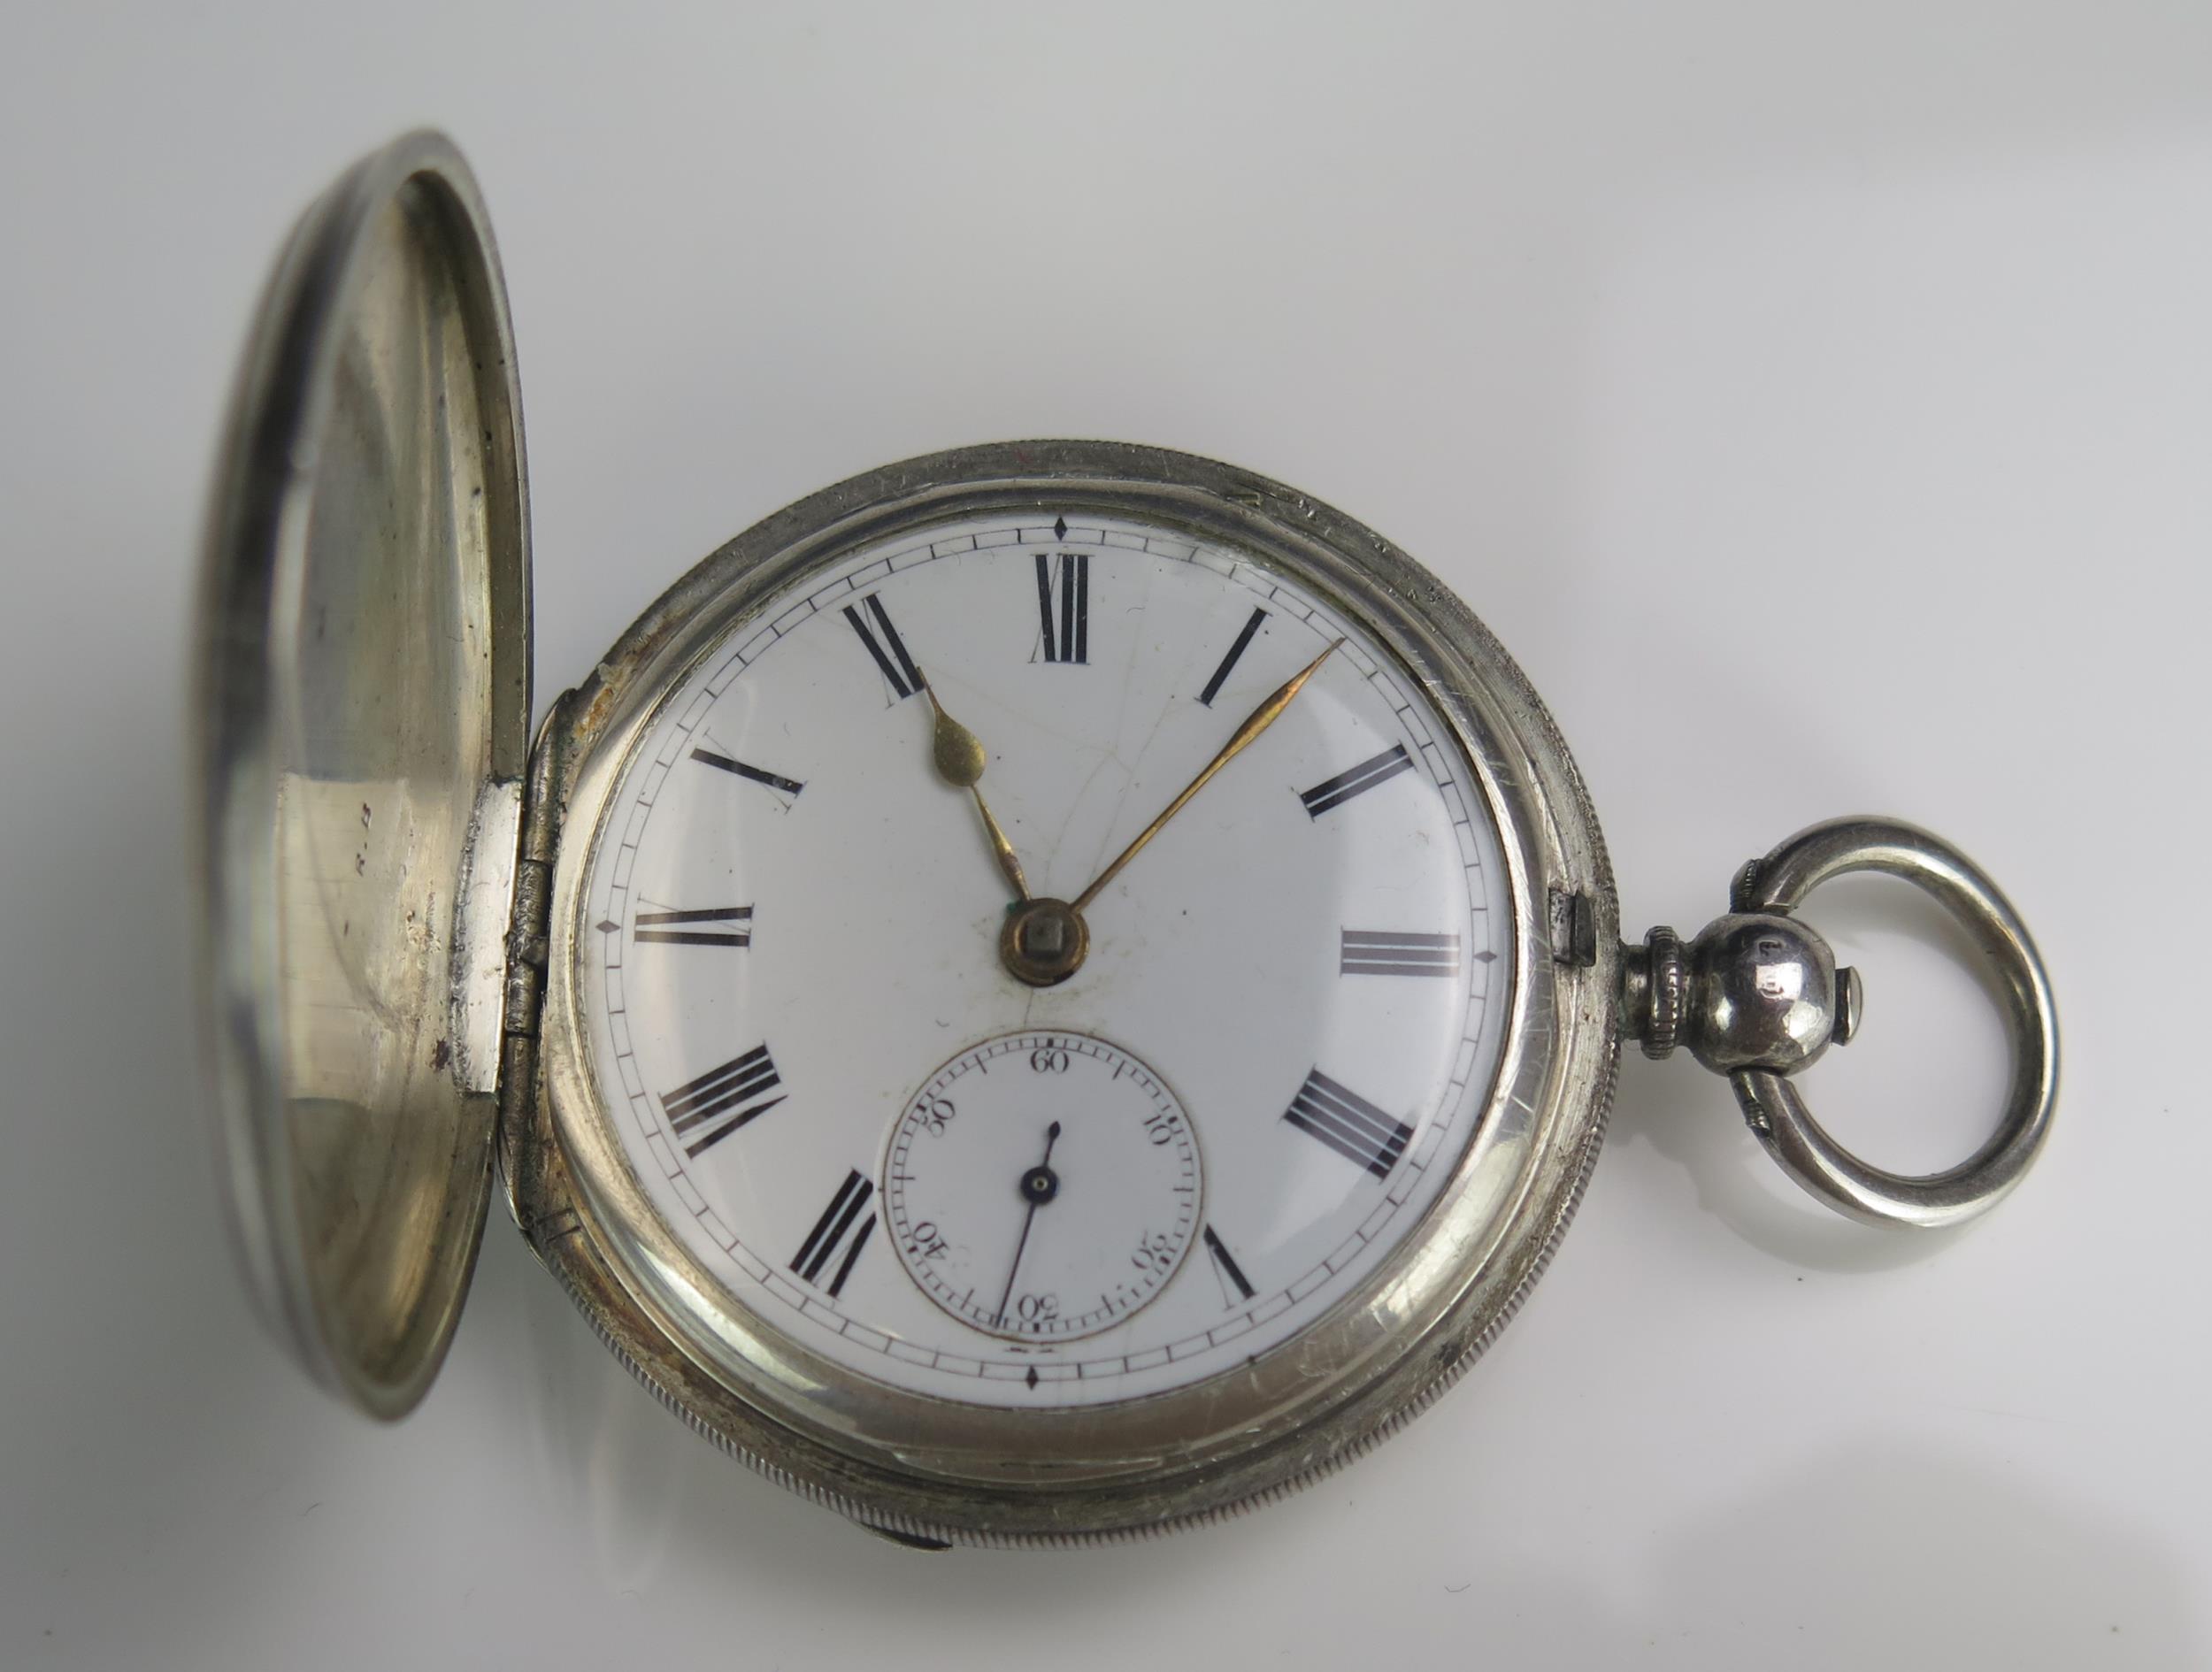 A Victorian Silver Cased Full Hunter Pocket Watch, 48.7mm case with enamel dial and Roman numerals - Image 2 of 4